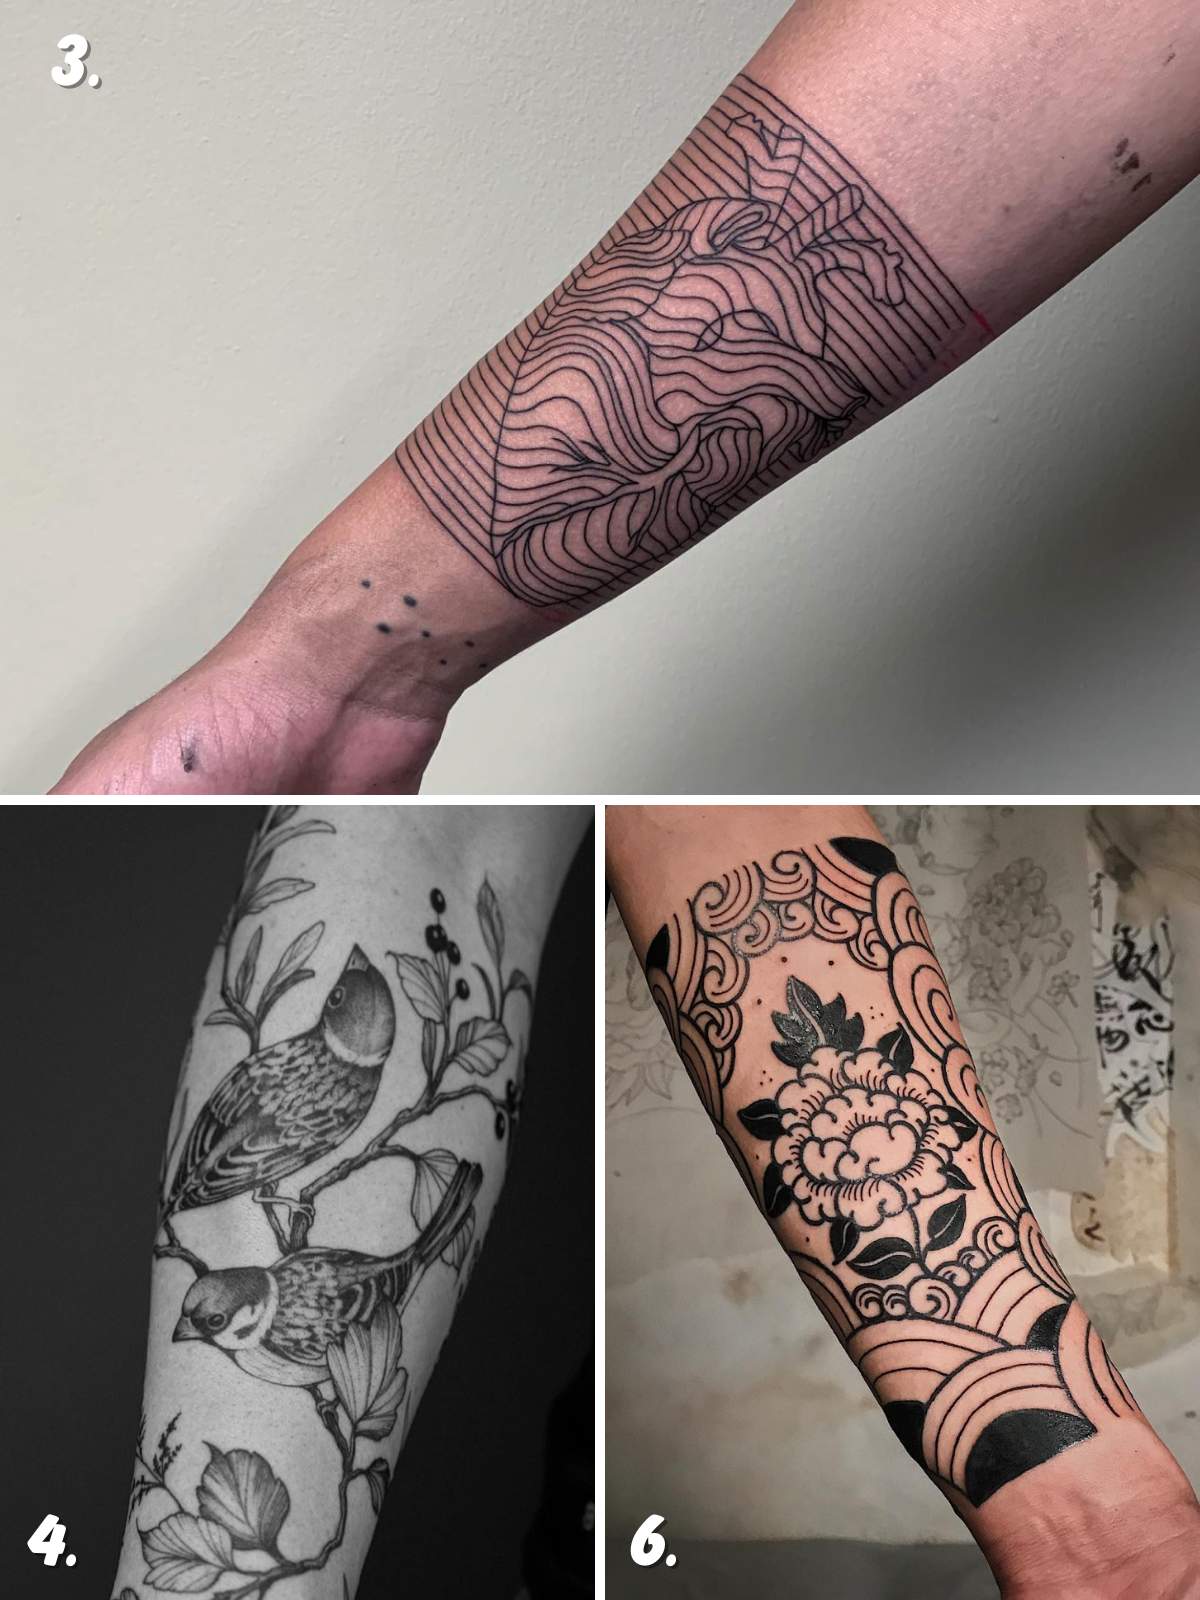 Three different tattoos. One of a heart with lines. One with a Bird. And one with a traditional flower.